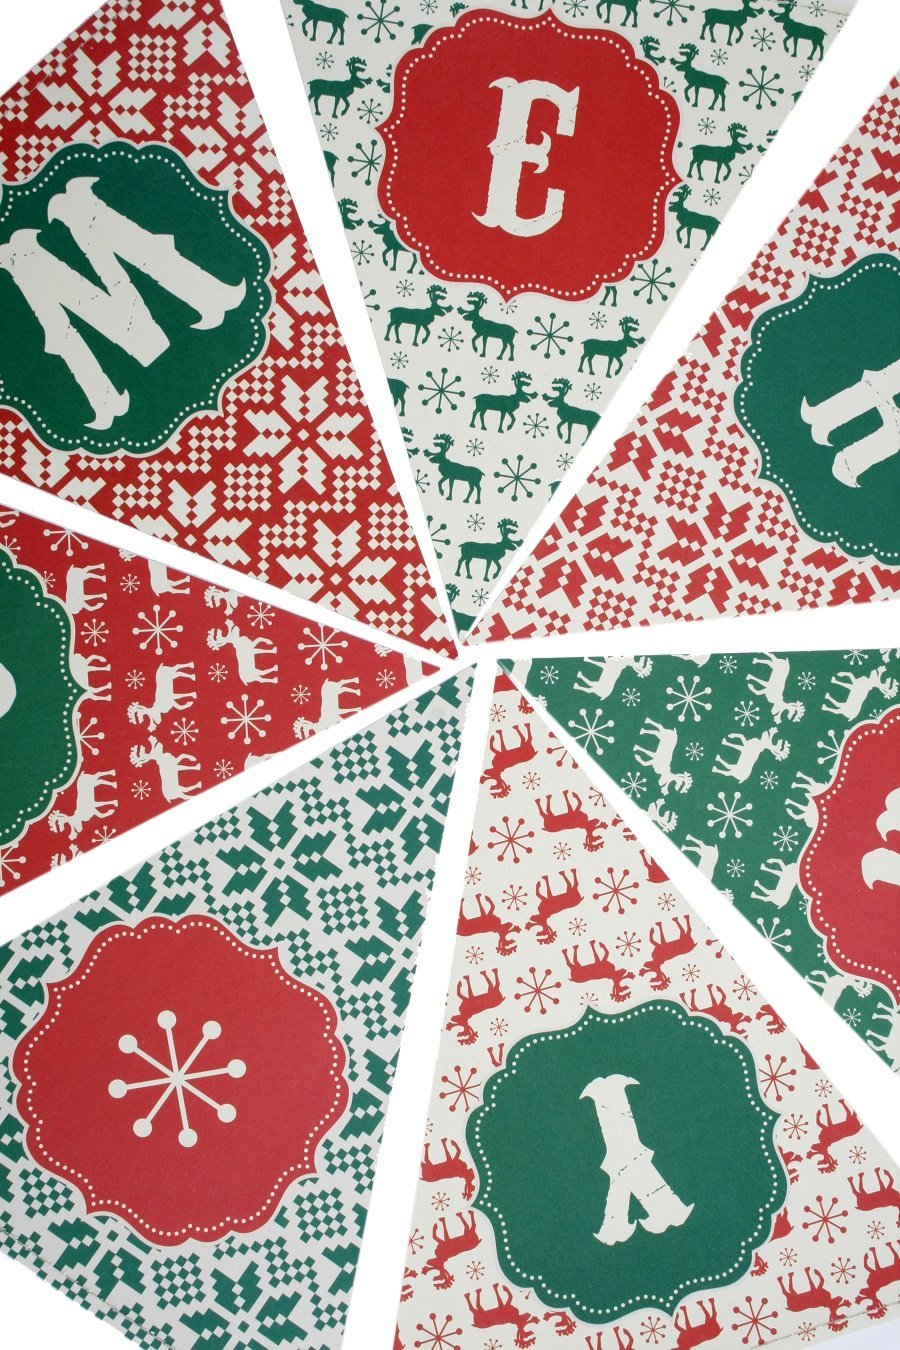 Merry Christmas Paper Bunting *** Hurry Limited Stock *** - LIVE LAUGH LOVE LIMITED